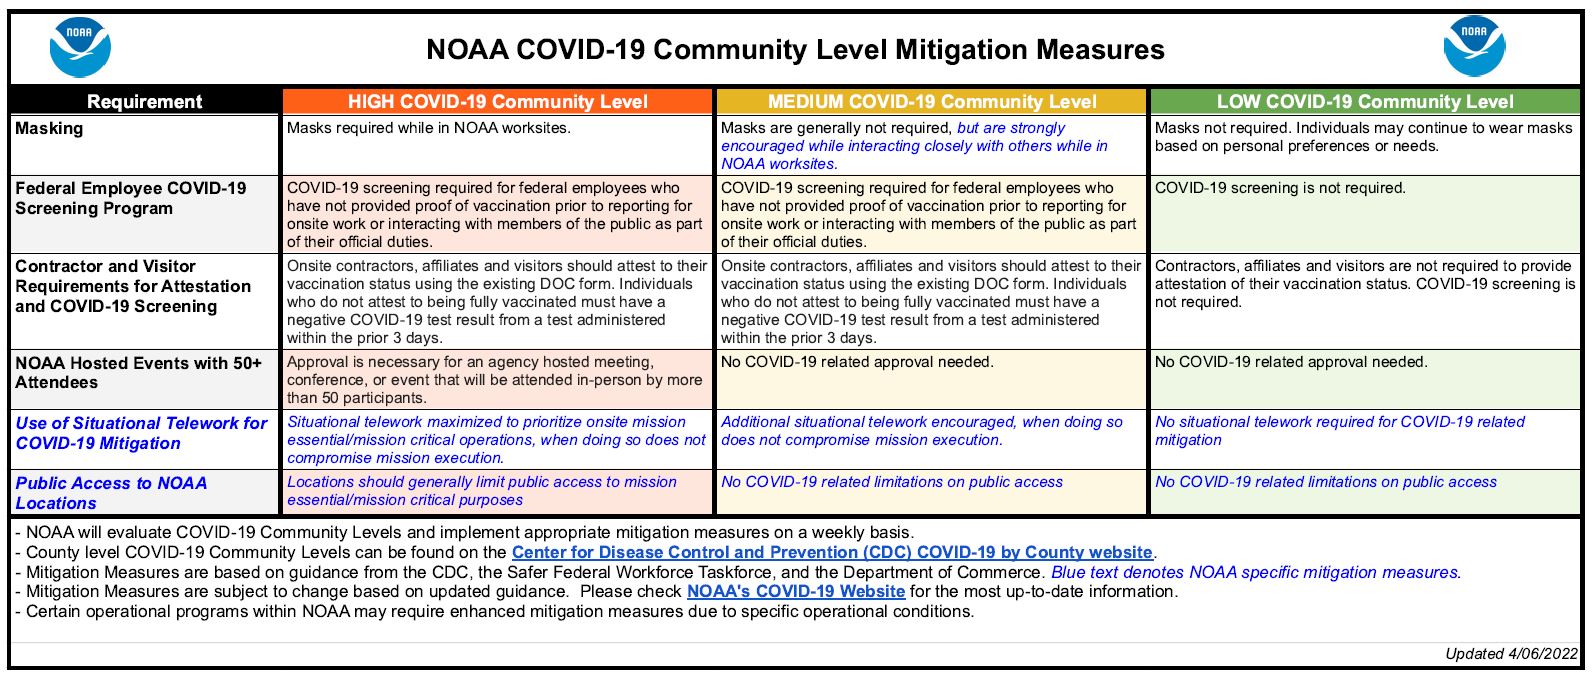 Table that explains different mitigation measures and requirements based on the Community Level determined by the CDC.